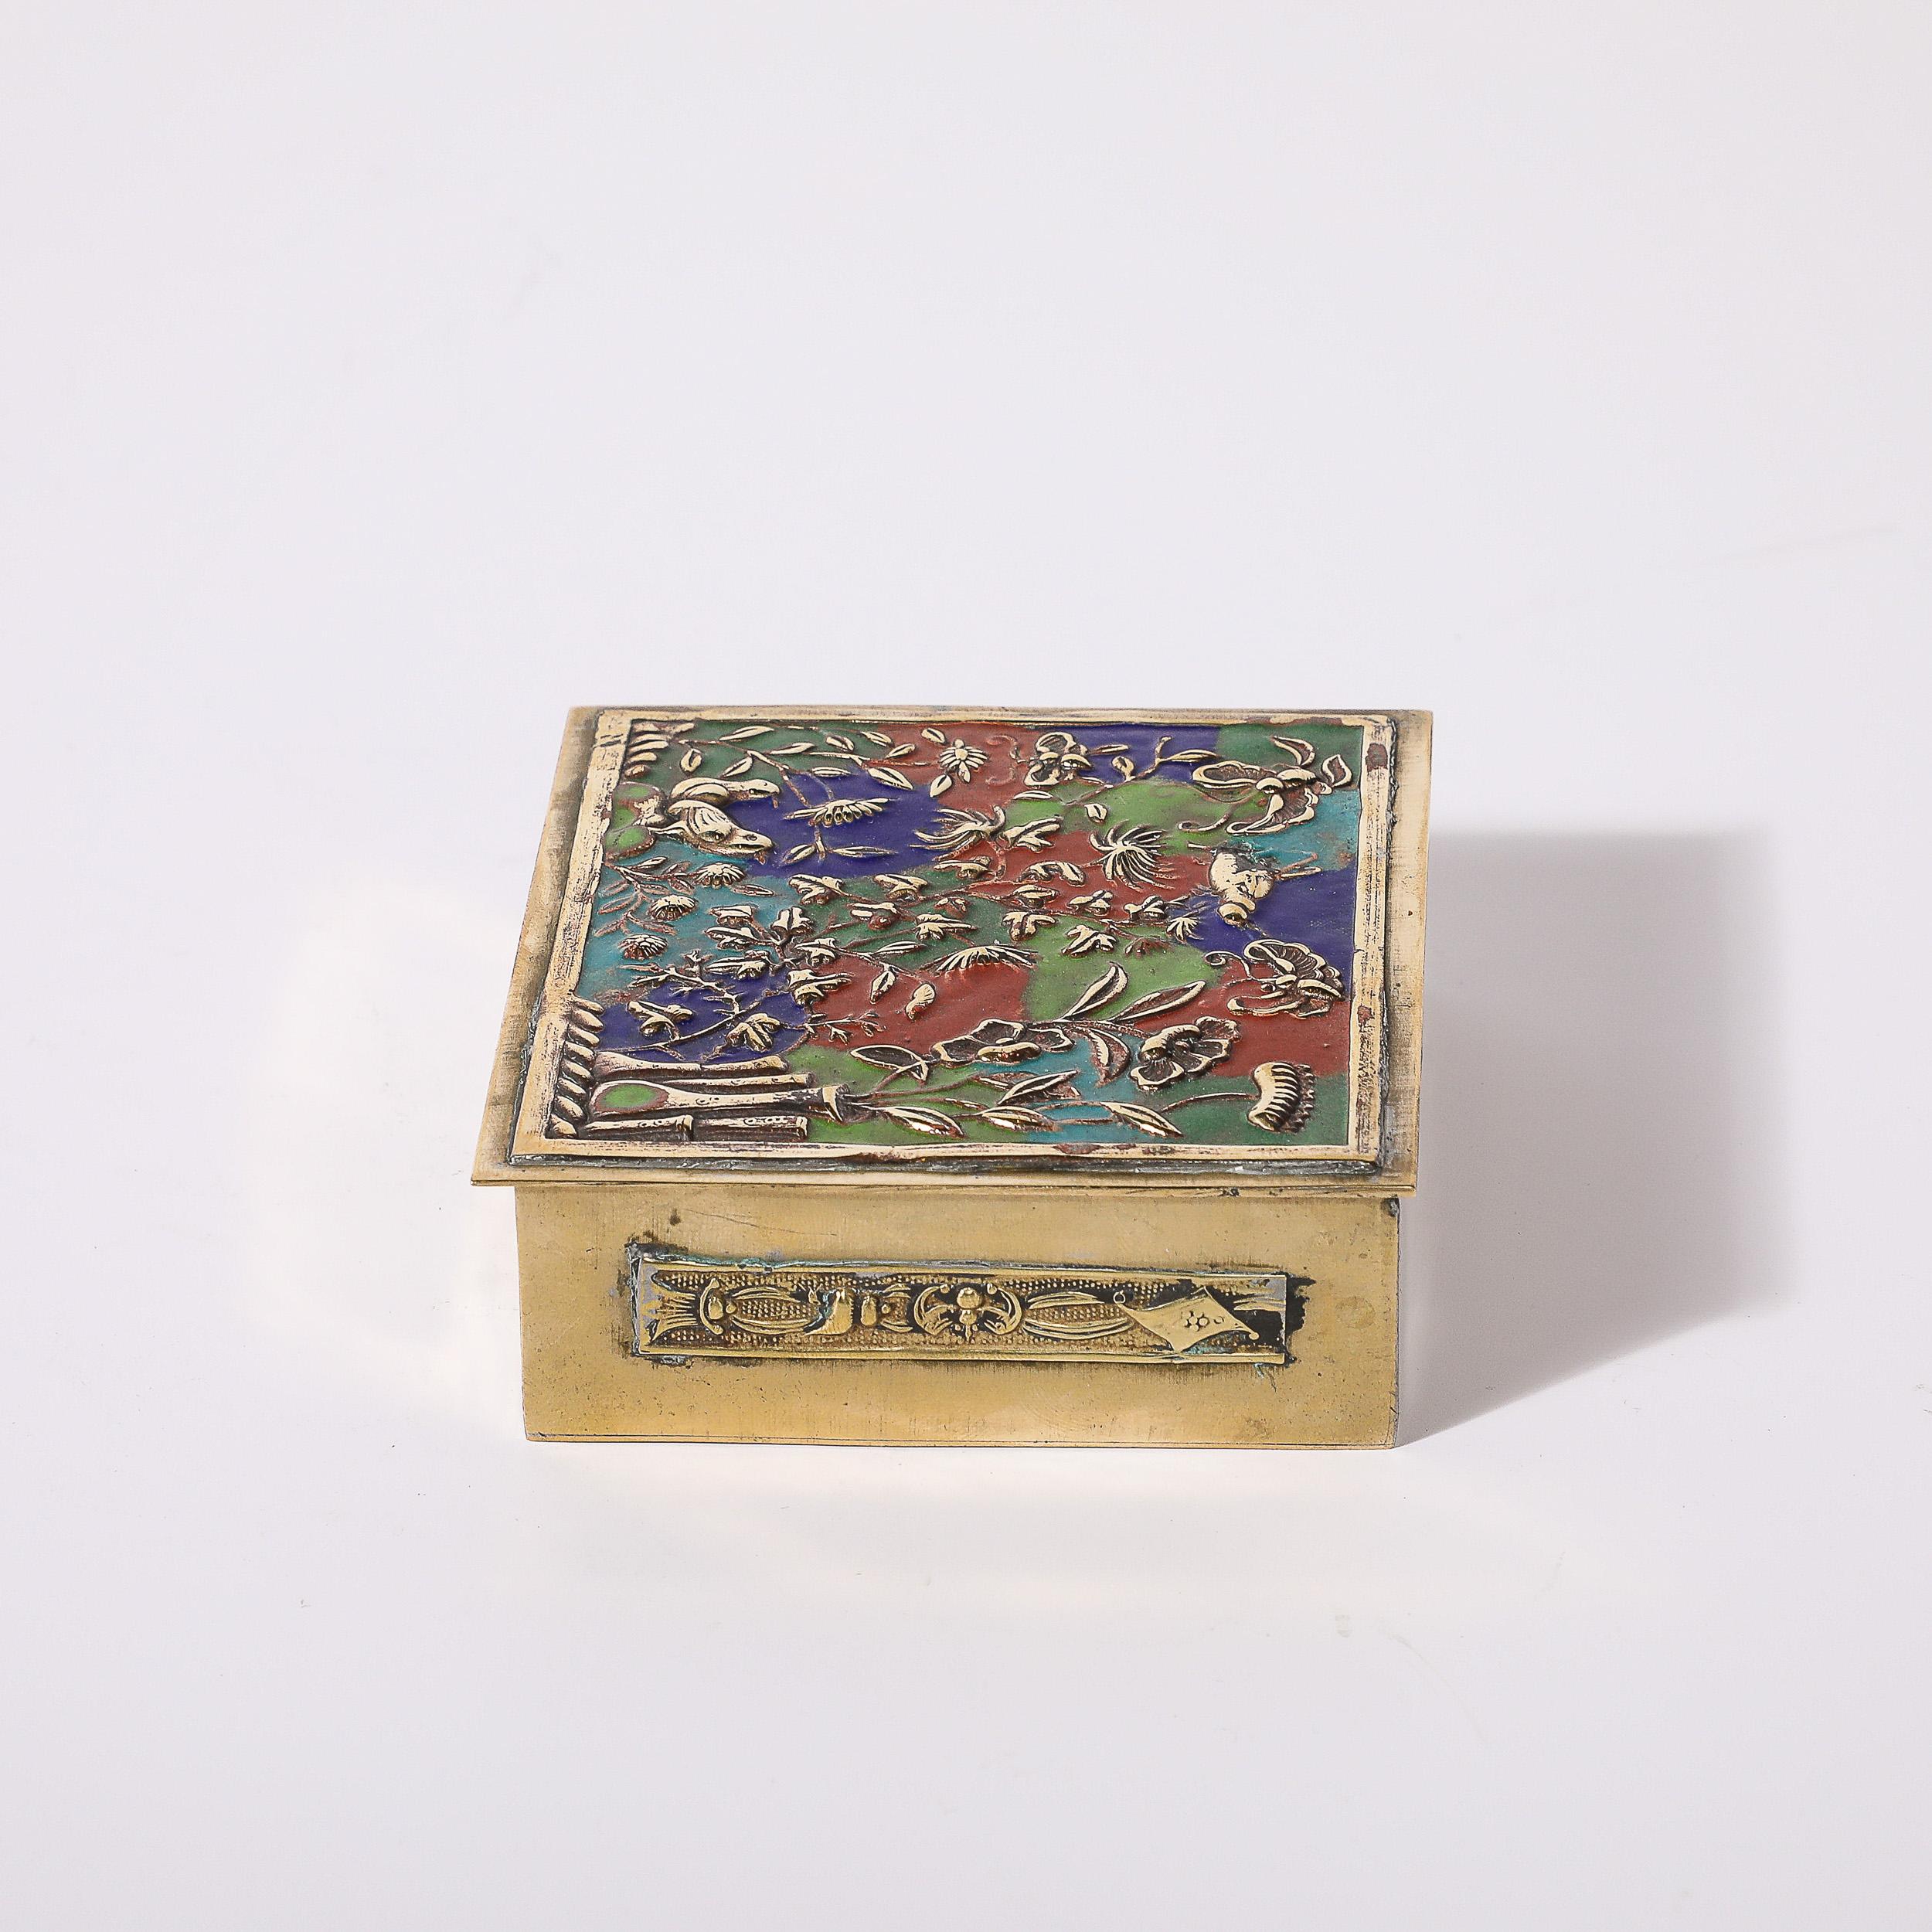 Art Deco Brass and Enamel Box W/ Naturalist Imagery in Relief Cloisonne For Sale 4